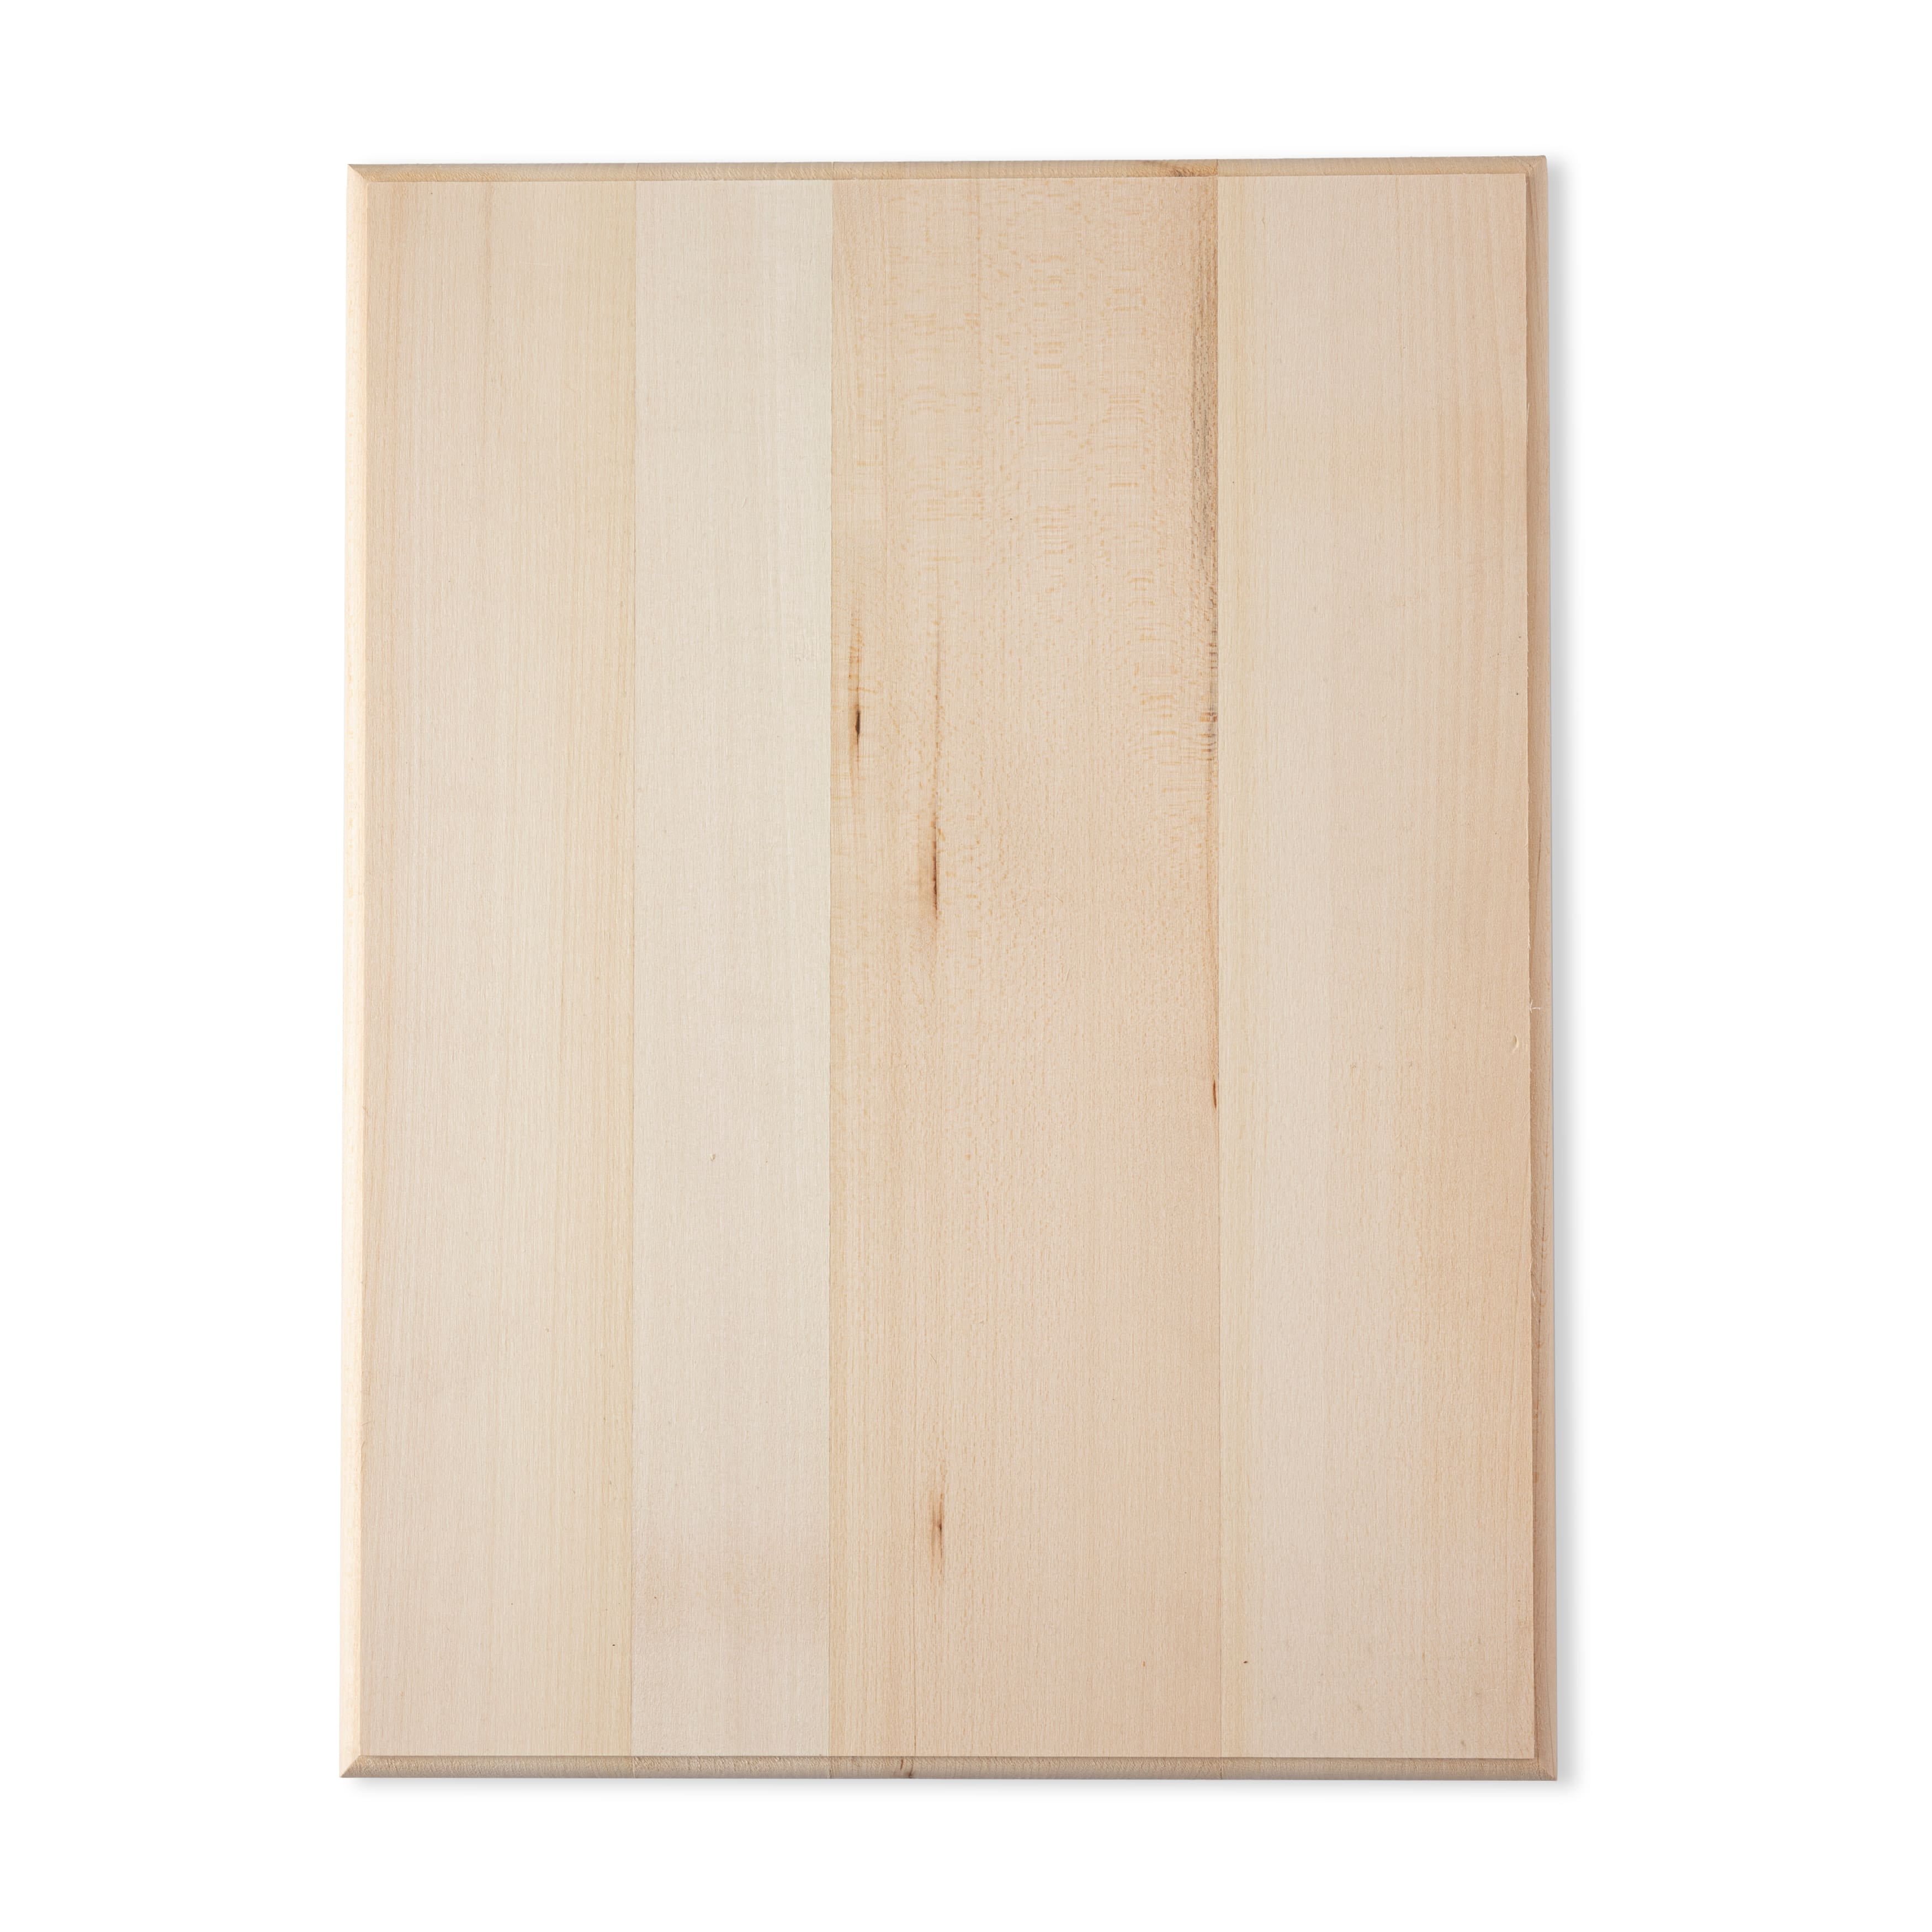  Darice Wood Rectangle Plaque, Natural : Home & Kitchen